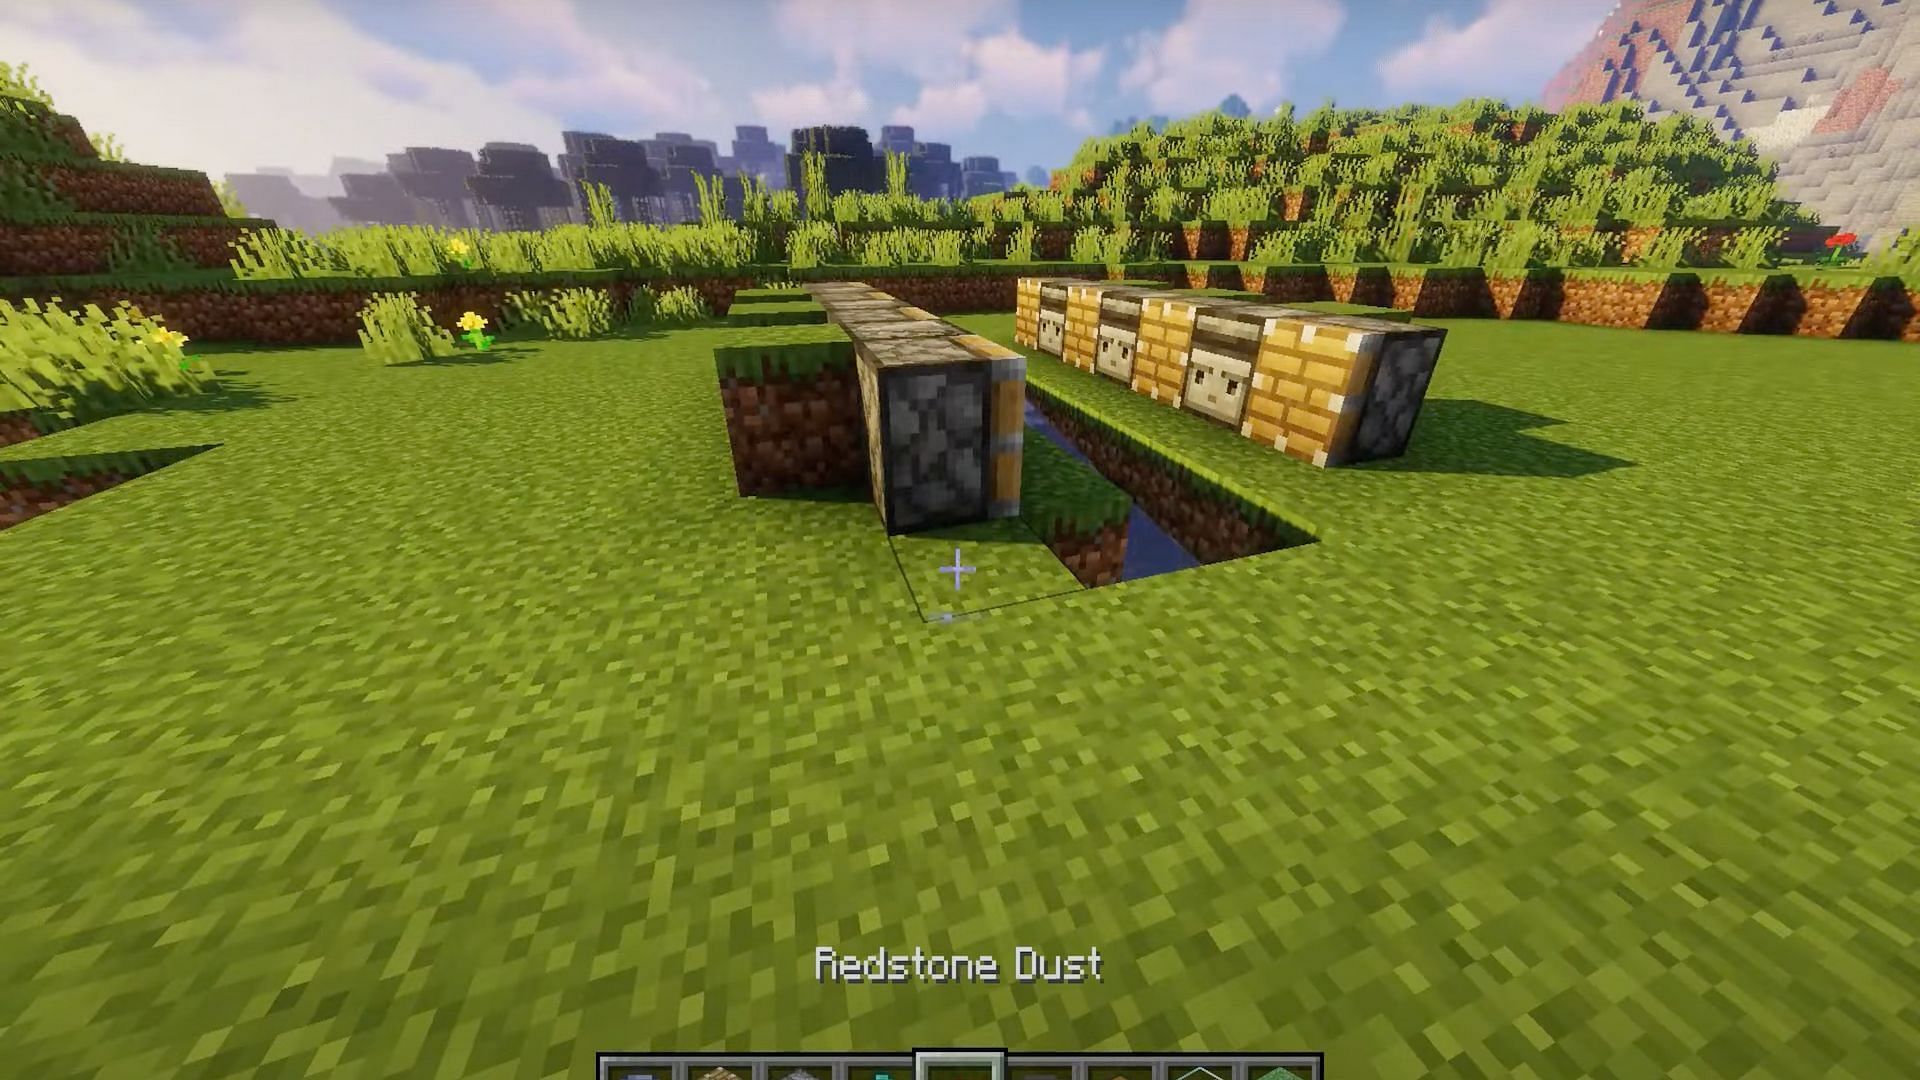 Players of Minecraft should place blocks behind the observers (Image via NaMiature/YouTube)